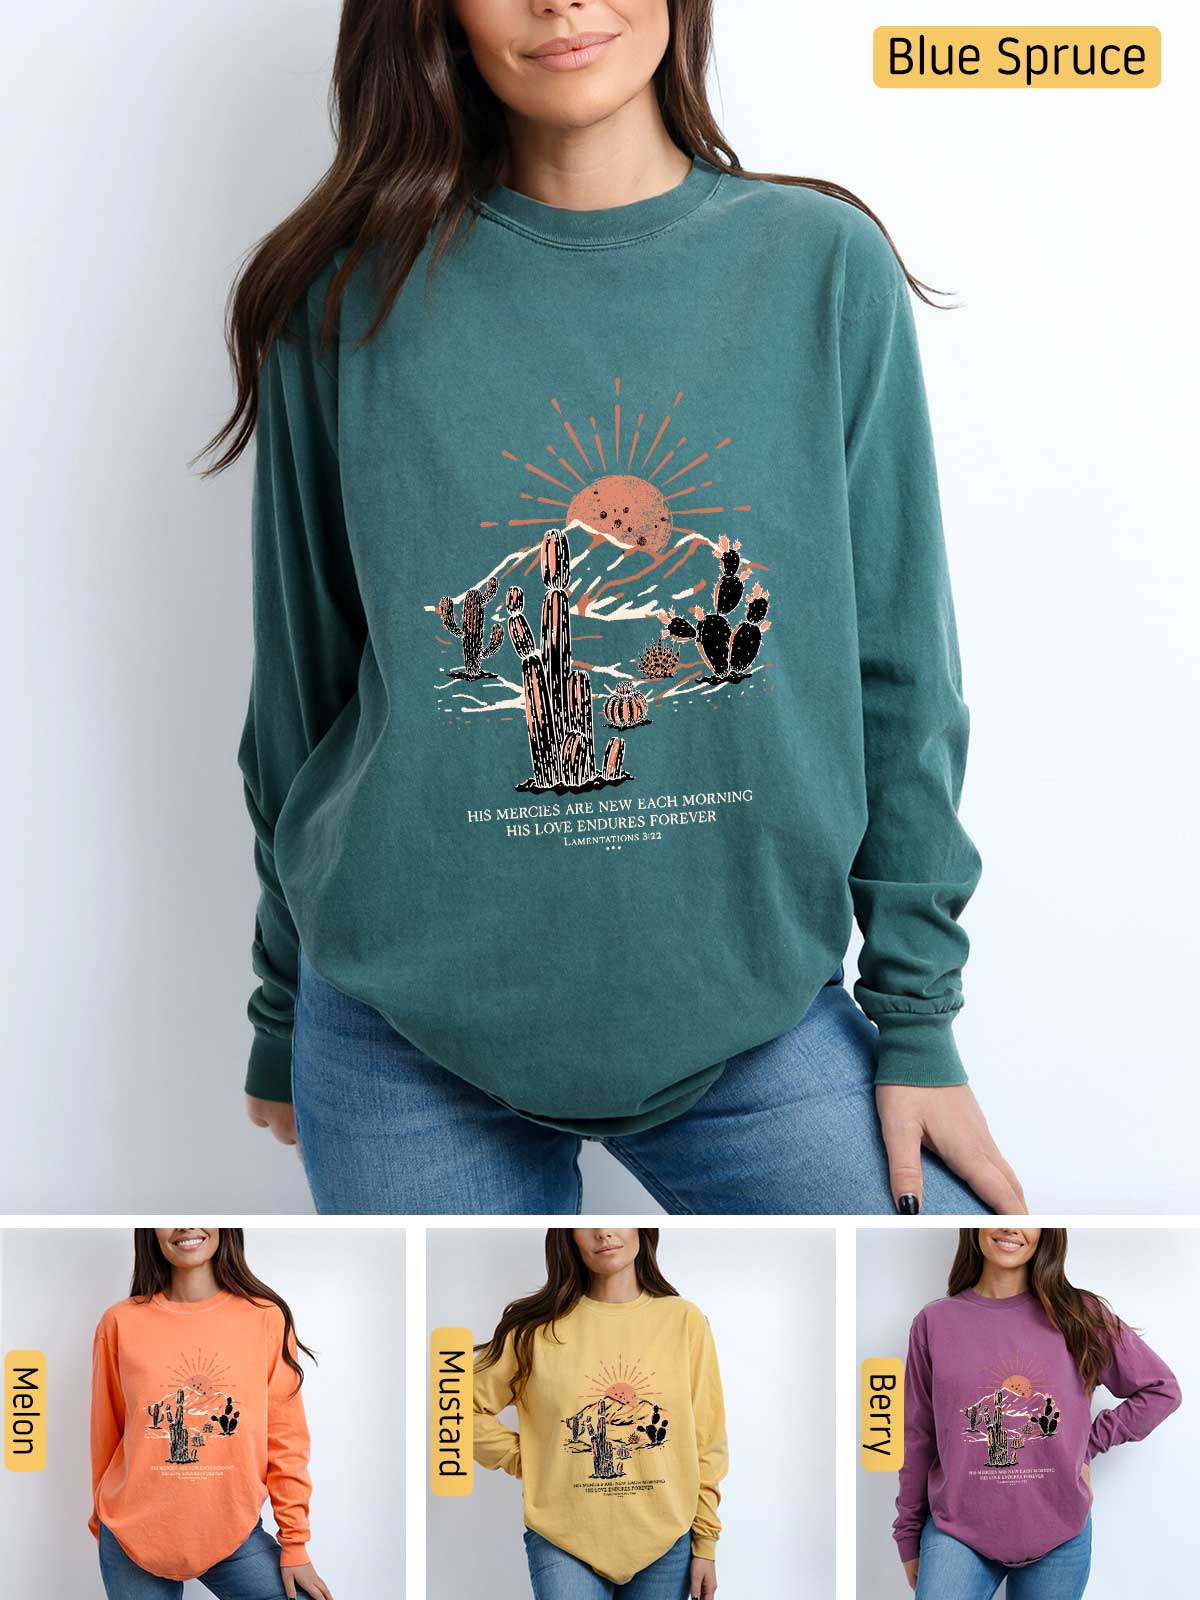 a woman wearing a sweatshirt with a cactus on it